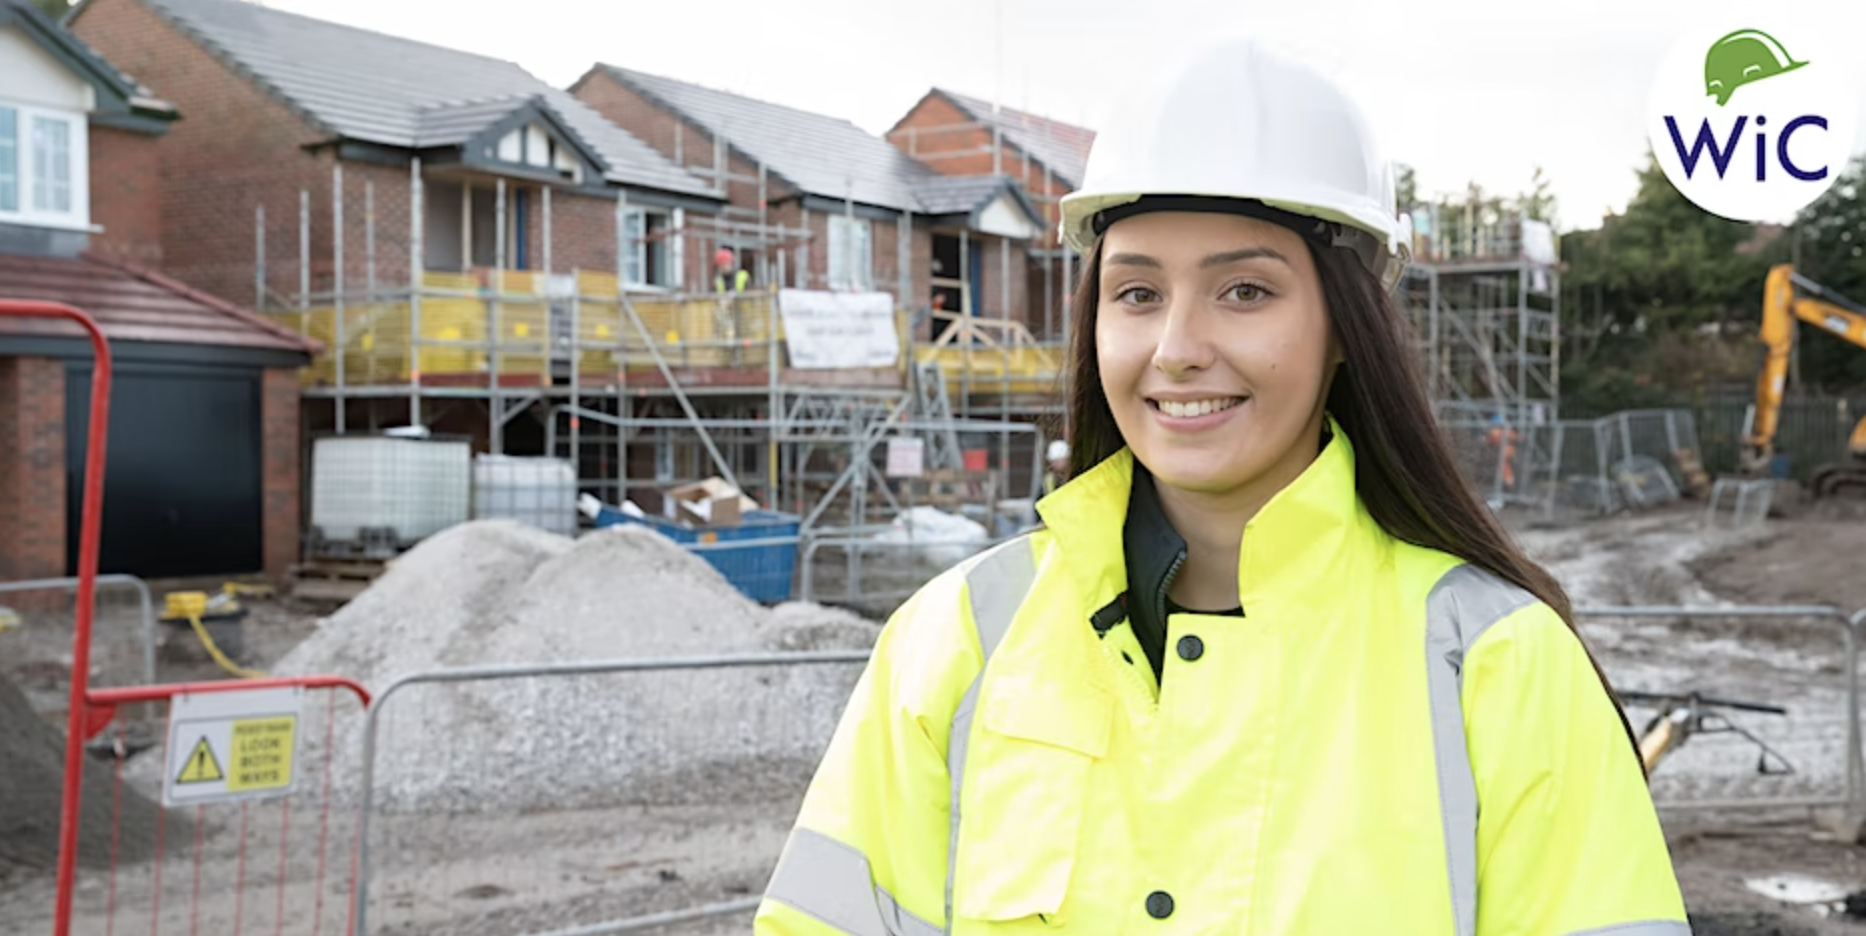 Employment Programme for Women in Construction Launches